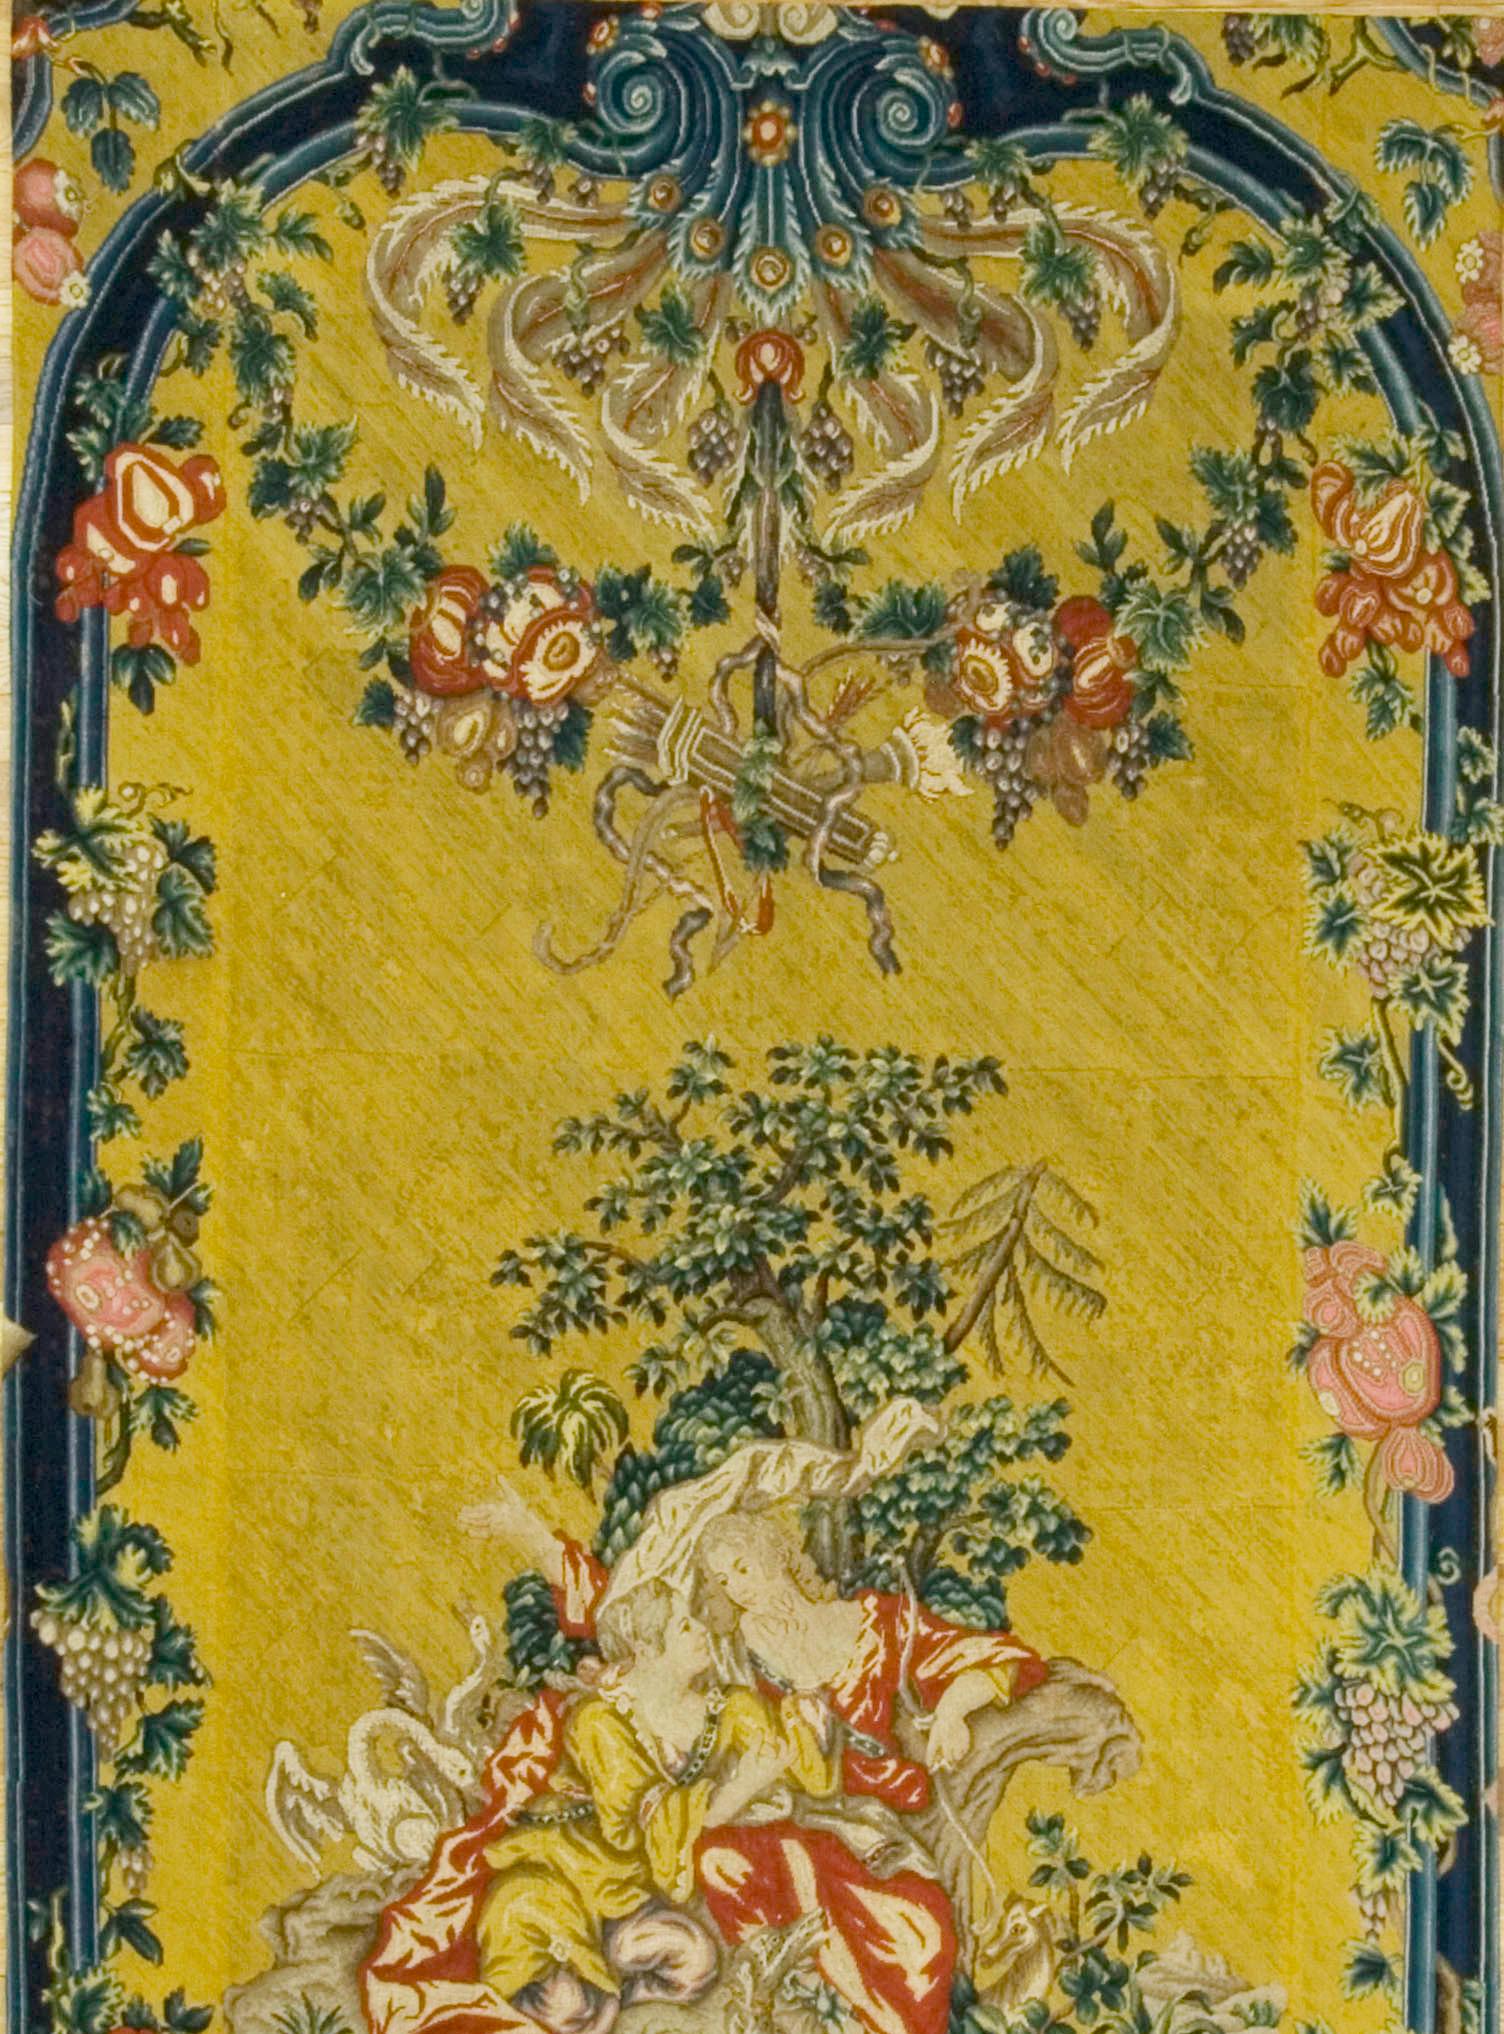 Hand-Woven Needlepoint Panel Mythological Scene in the Manner of Boucher  4'2 x 8'7 For Sale